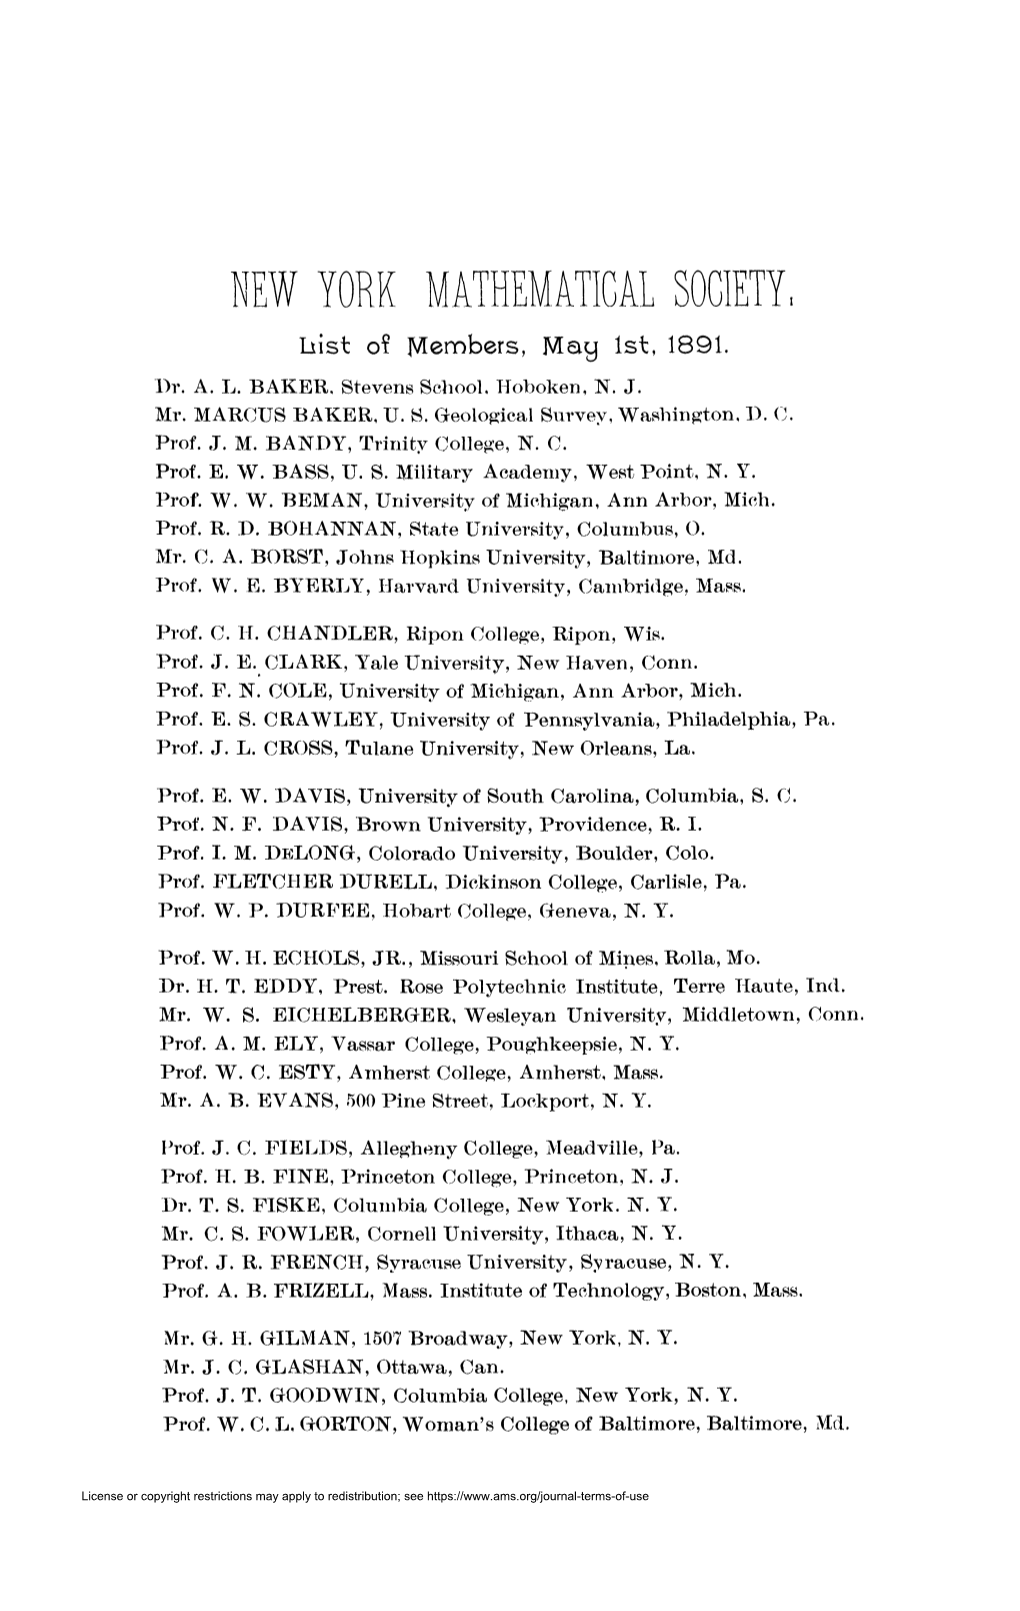 NEW YORK MATHEMATICAL SOCIETY, Bist Oî Members, May 1St, 1891